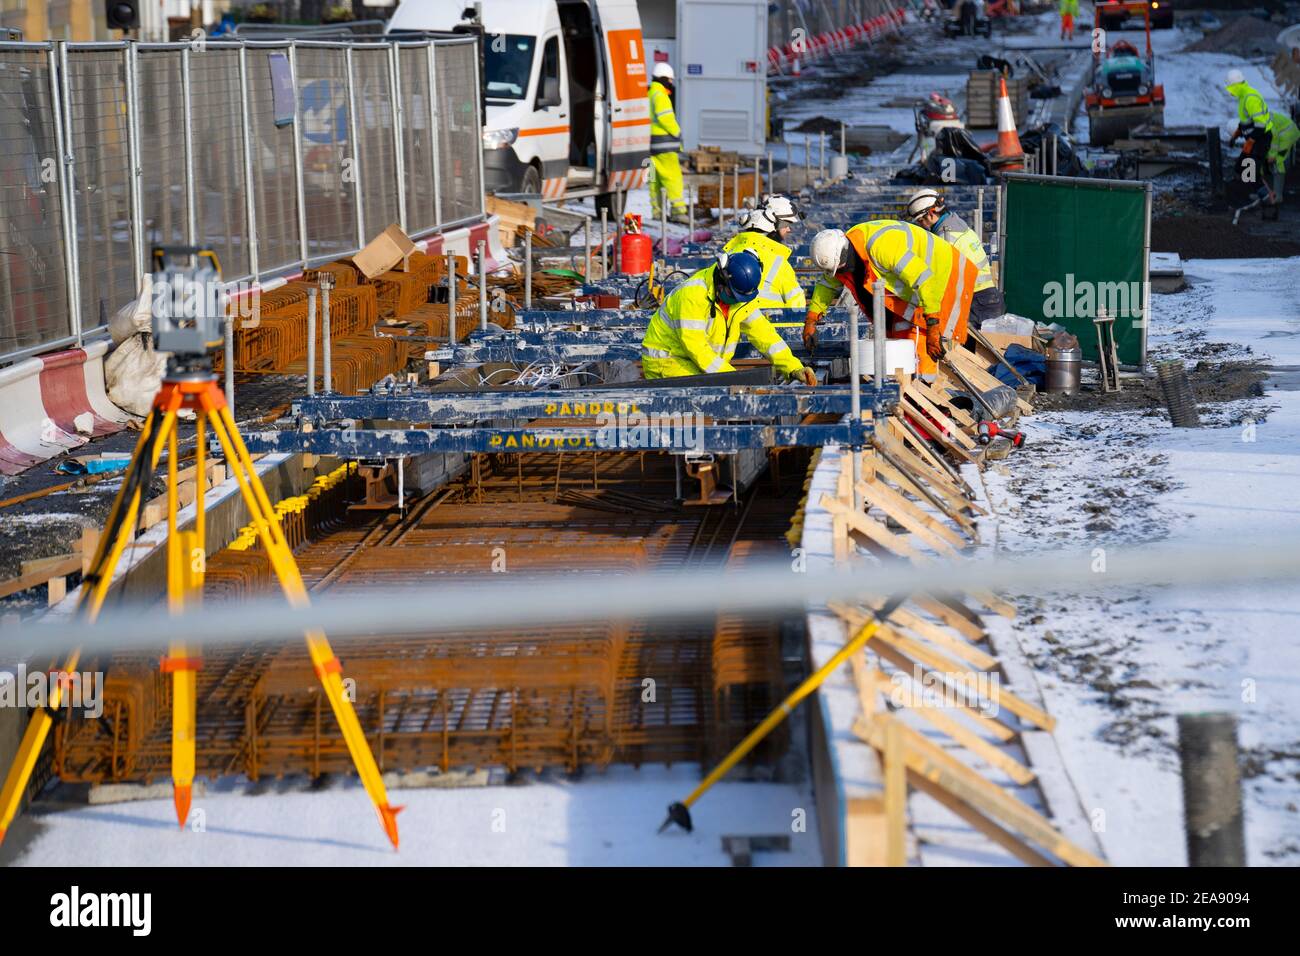 Edinburgh, Scotland, UK. 8 Feb 2021.  Construction workers installing tram tracks as part of the Trams to Newhaven project in Leith, Edinburgh.  Iain Masterton/Alamy Live news Stock Photo